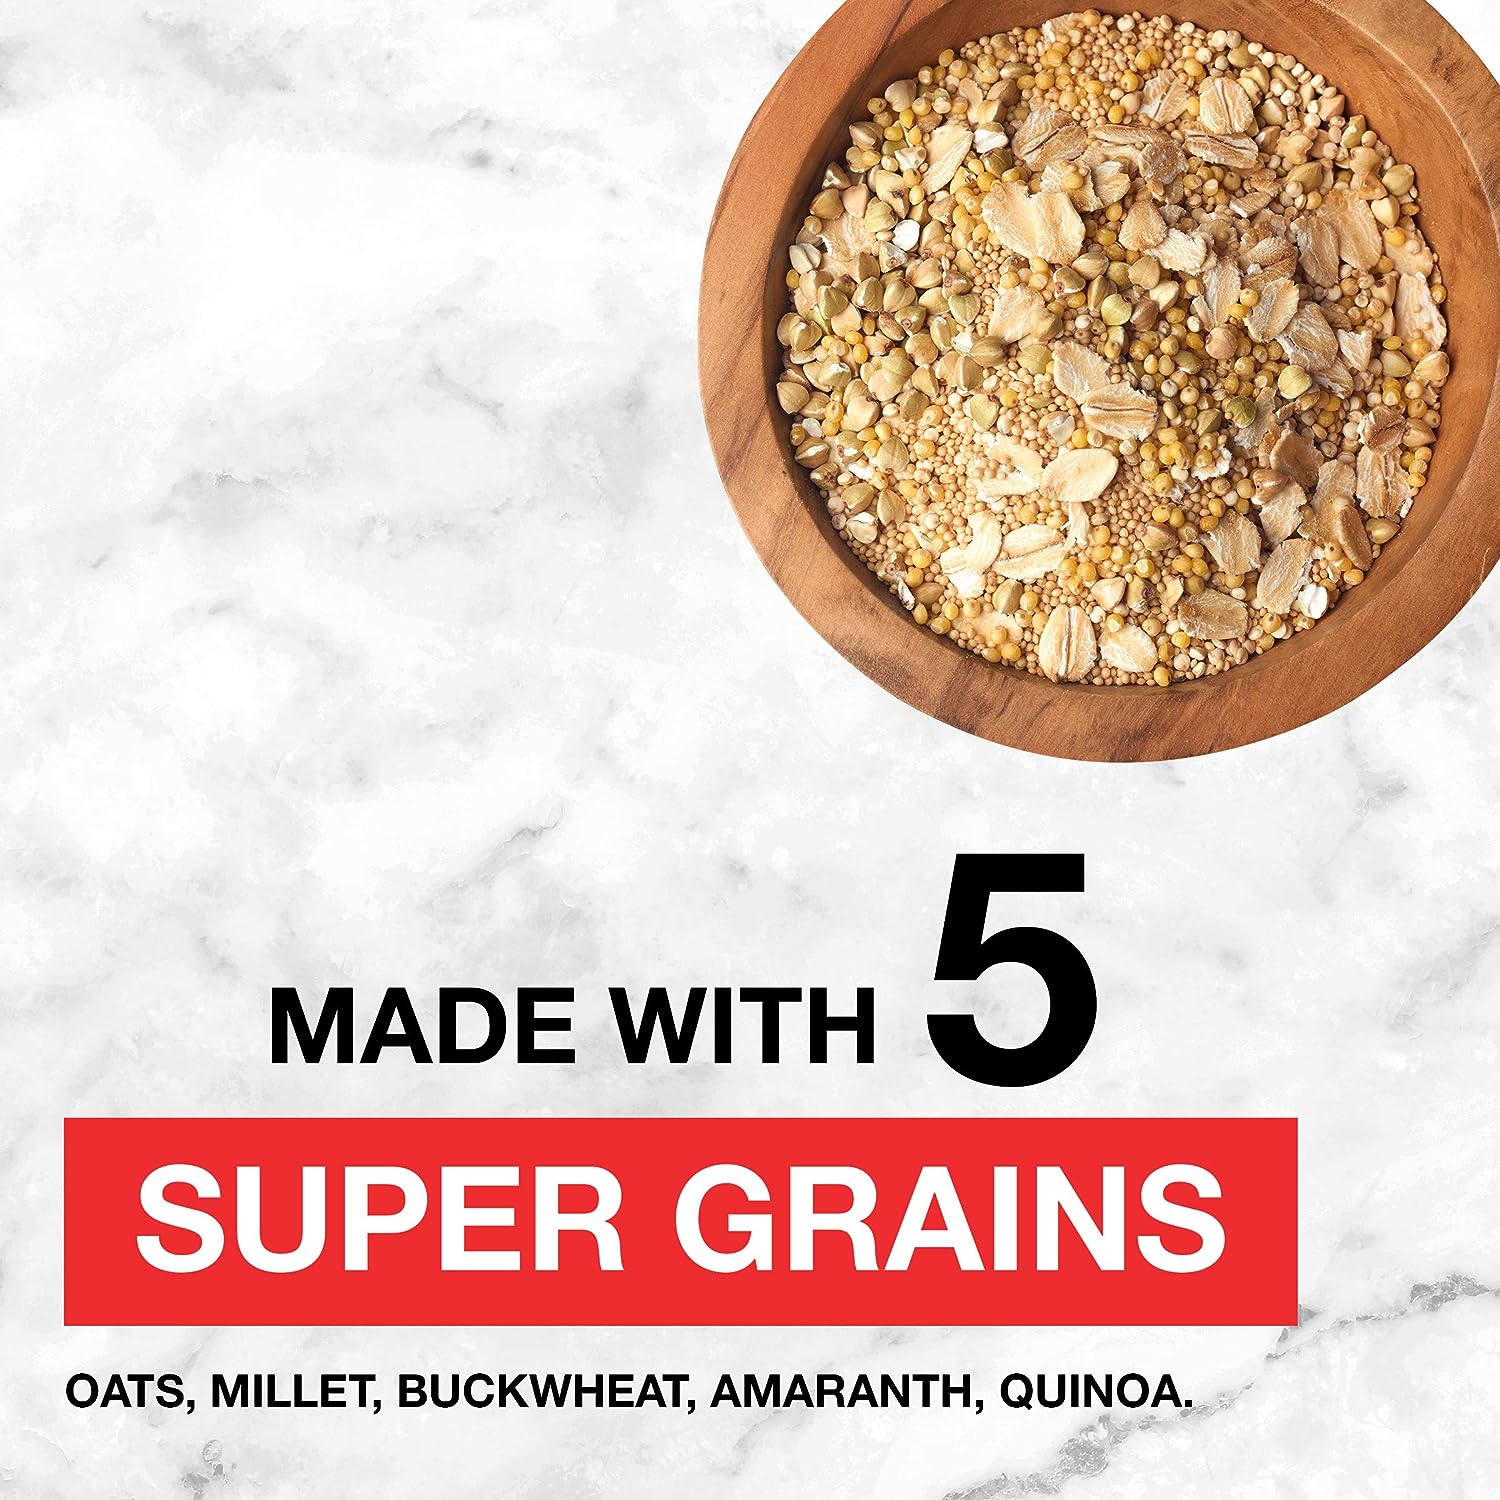 Wholesale prices with free shipping all over United States KIND Healthy Grains Clusters, Granola Variety Pack, Healthy Snacks, Gluten Free, 3 Count - Steven Deals